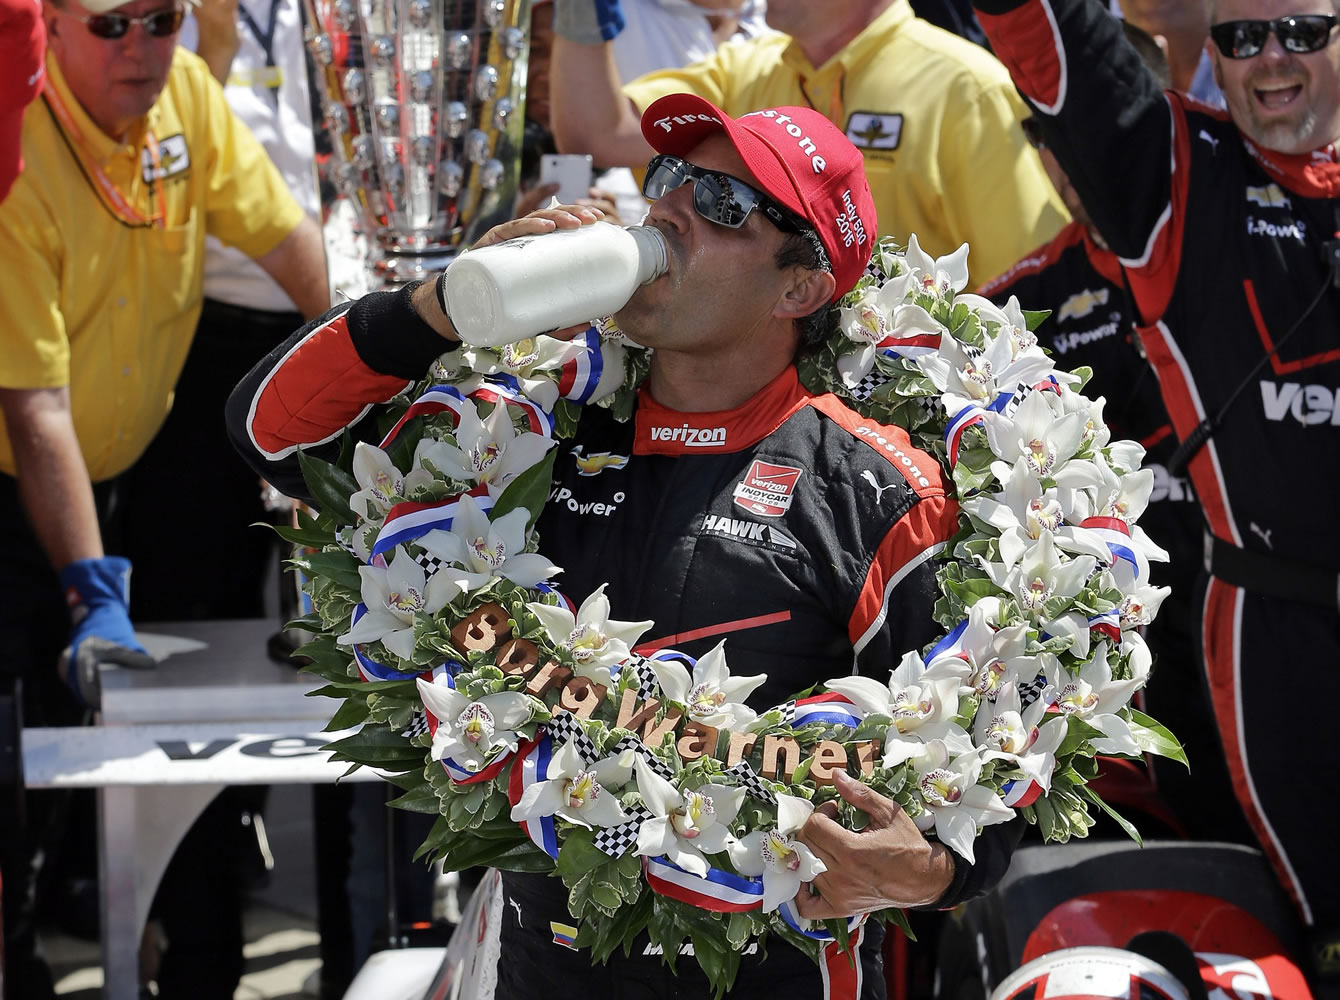 Juan Pablo Montoya celebrates with the traditional swig of milk after winning the 99th running of the Indianapolis 500 on Sunday, May 24, 2015.